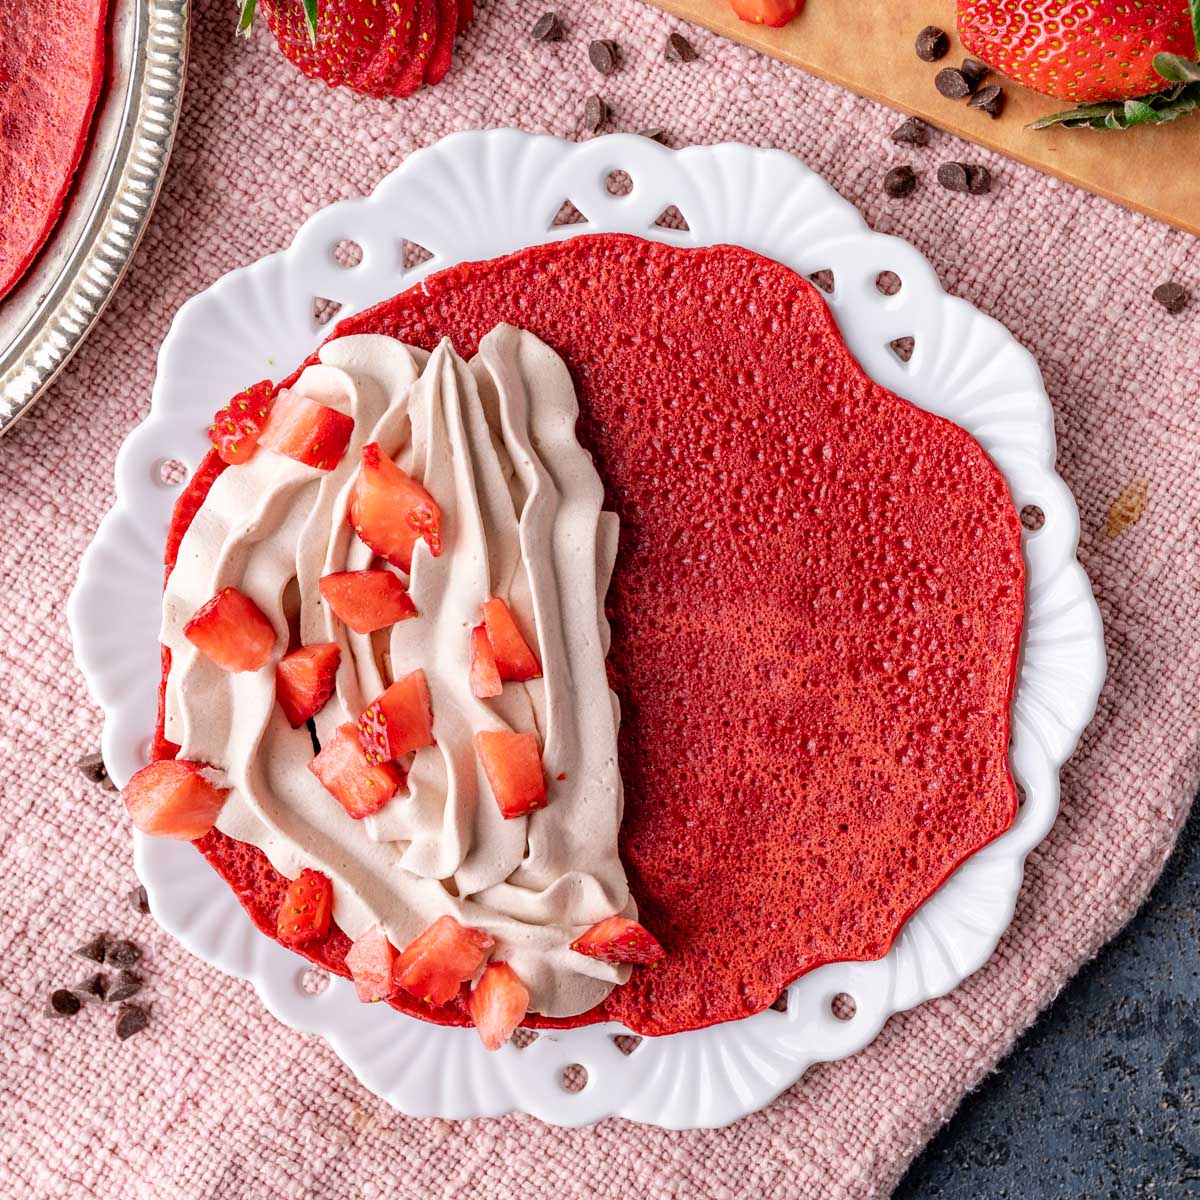 a red velvet crepe, half covered with whipped cream and strawberries